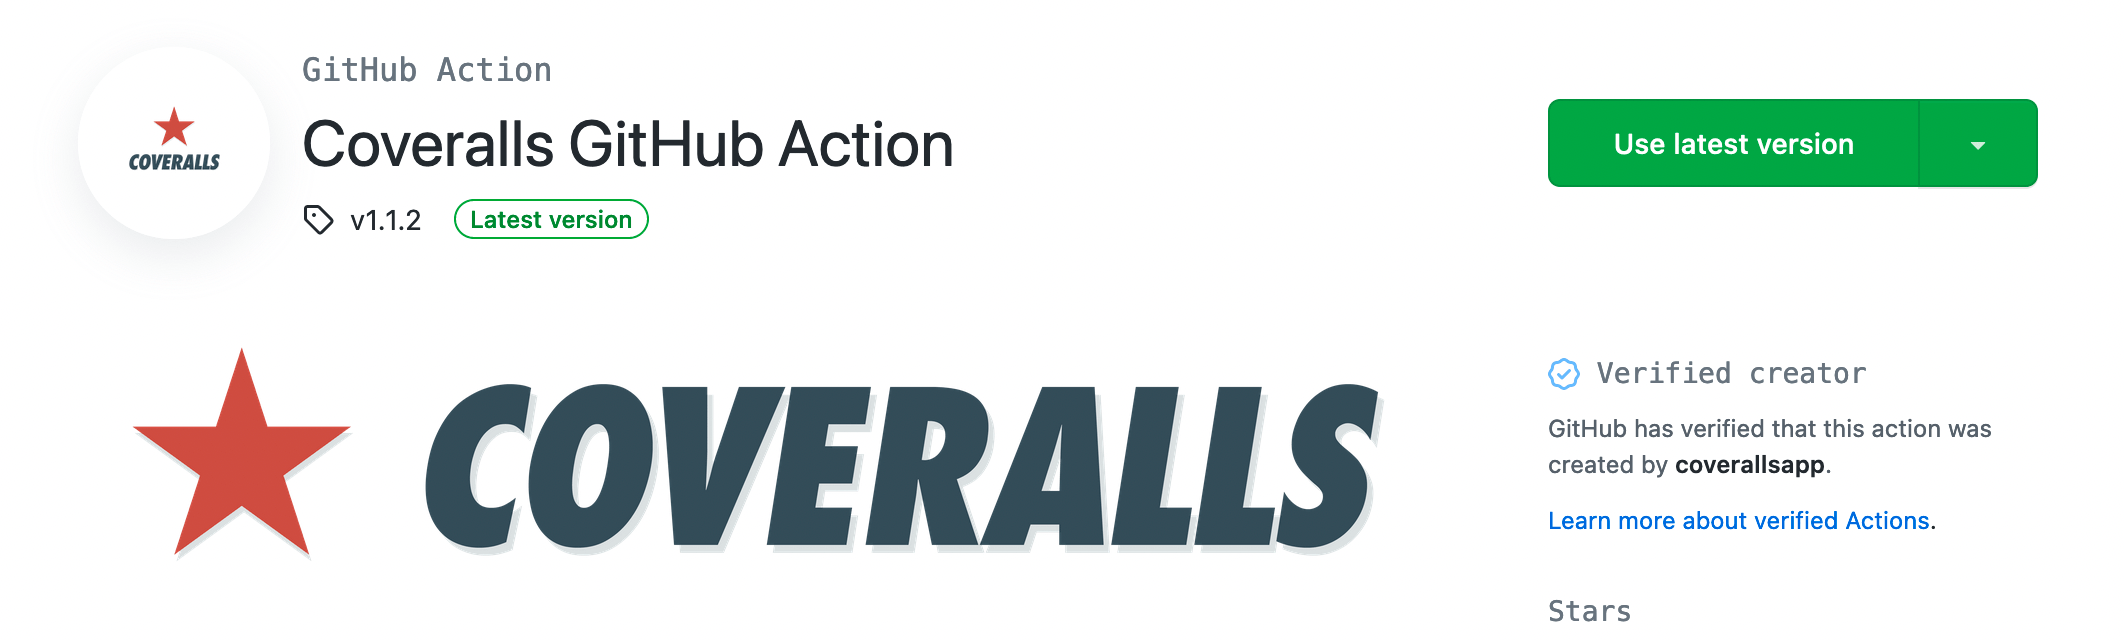 coveralls_github_actions-fs8.png